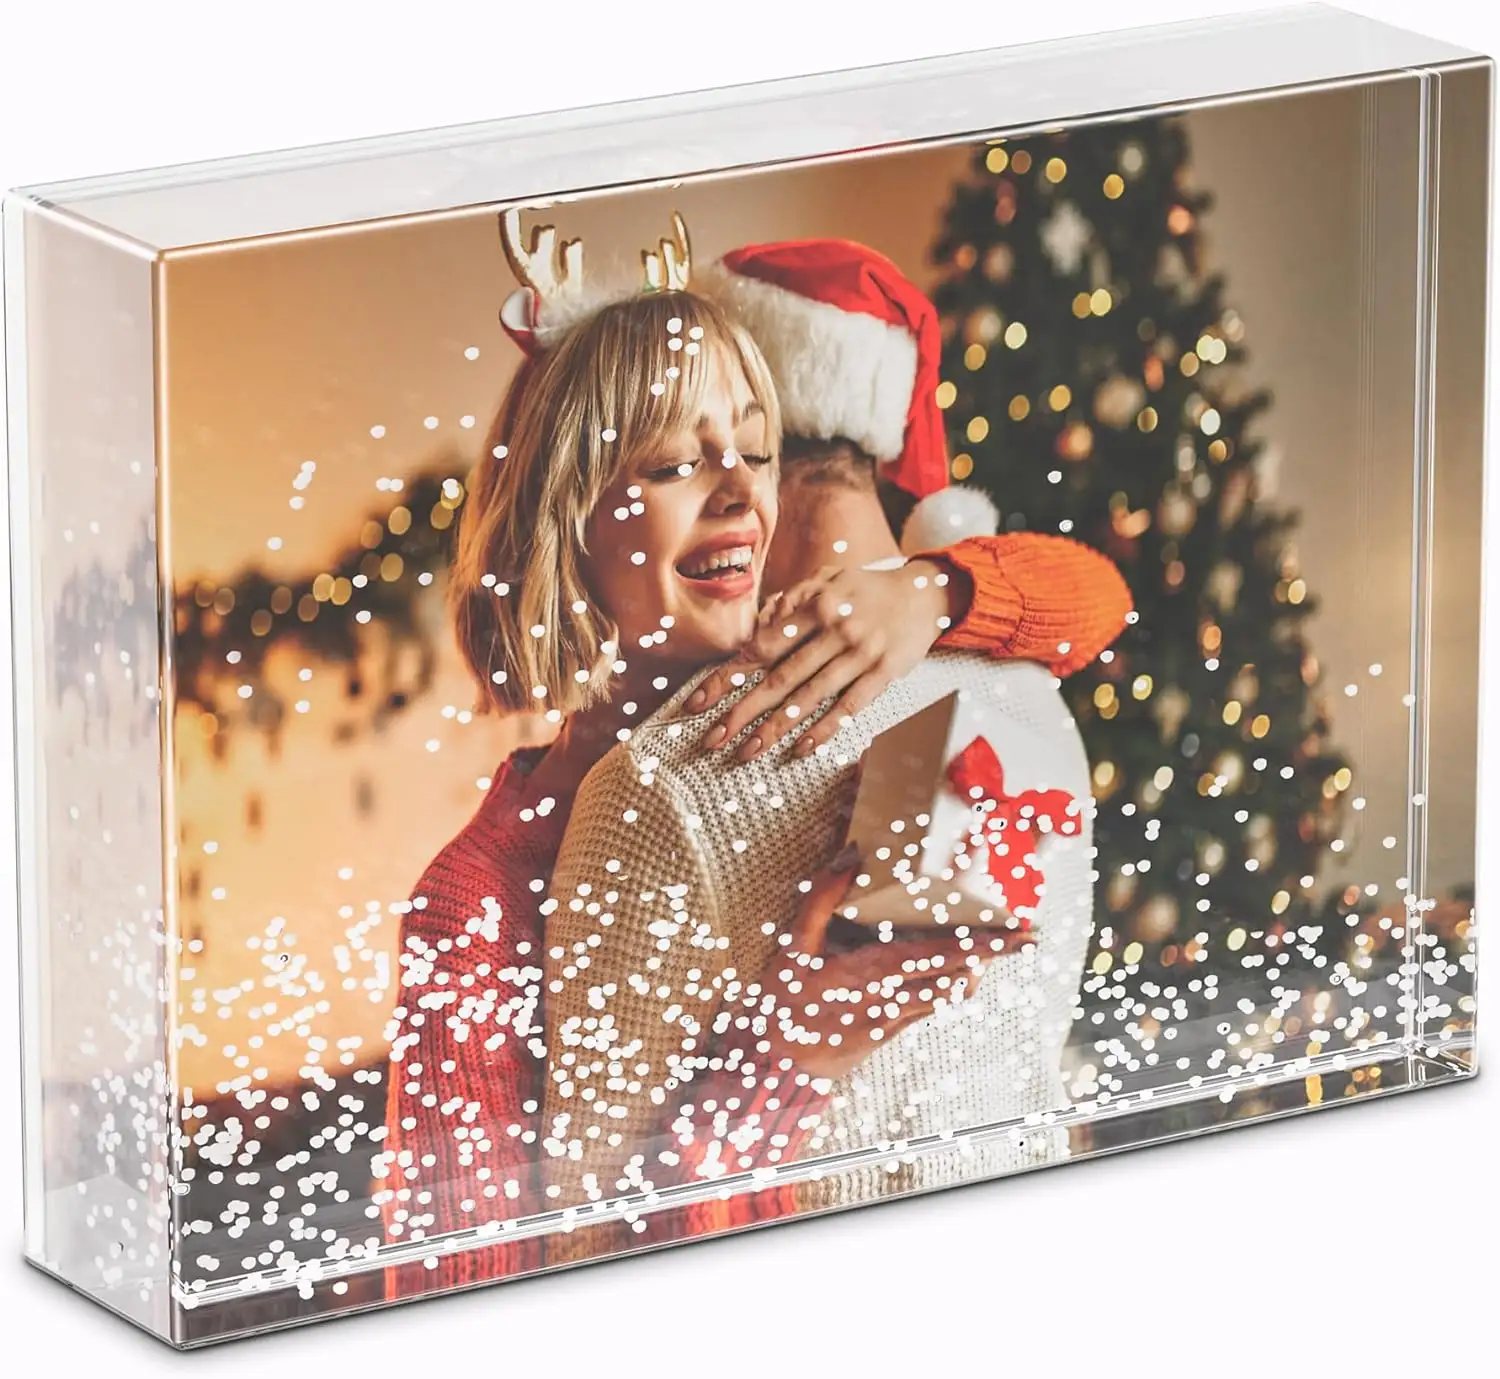 Glitter Liquid Photo Frame for Christmas, Clear Plastic Acrylic Floating Sparkle Water Personalized Snow Globe Photo Frame